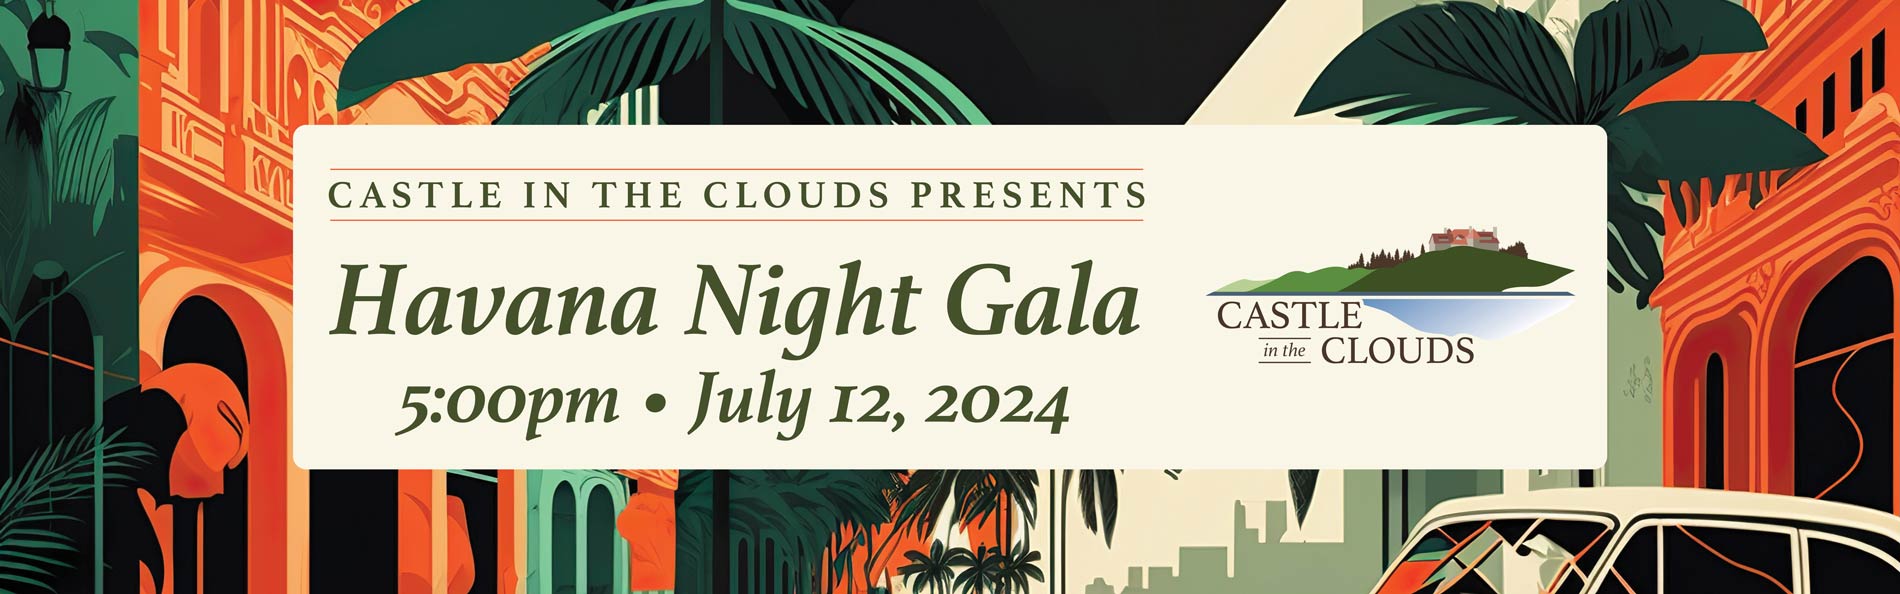 Castle in the Clouds Presents Havana Night Gala, 5:00 pm July 12, 2024